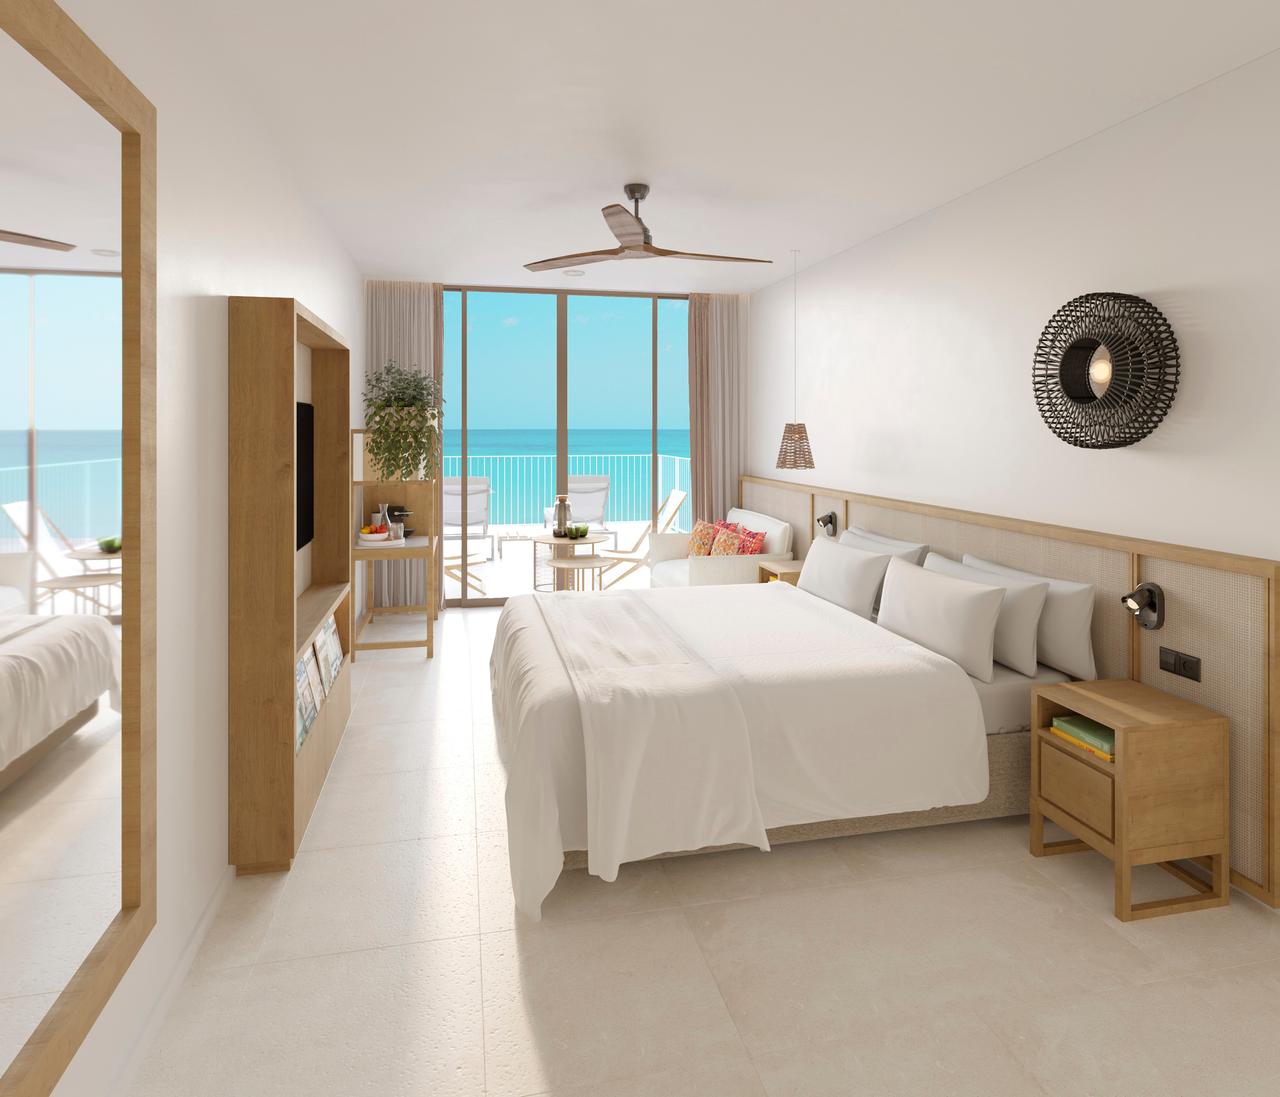 Artist impression of bedroom at Paradisus Gran Canaria in Tenerife with balcony looking out to the sea